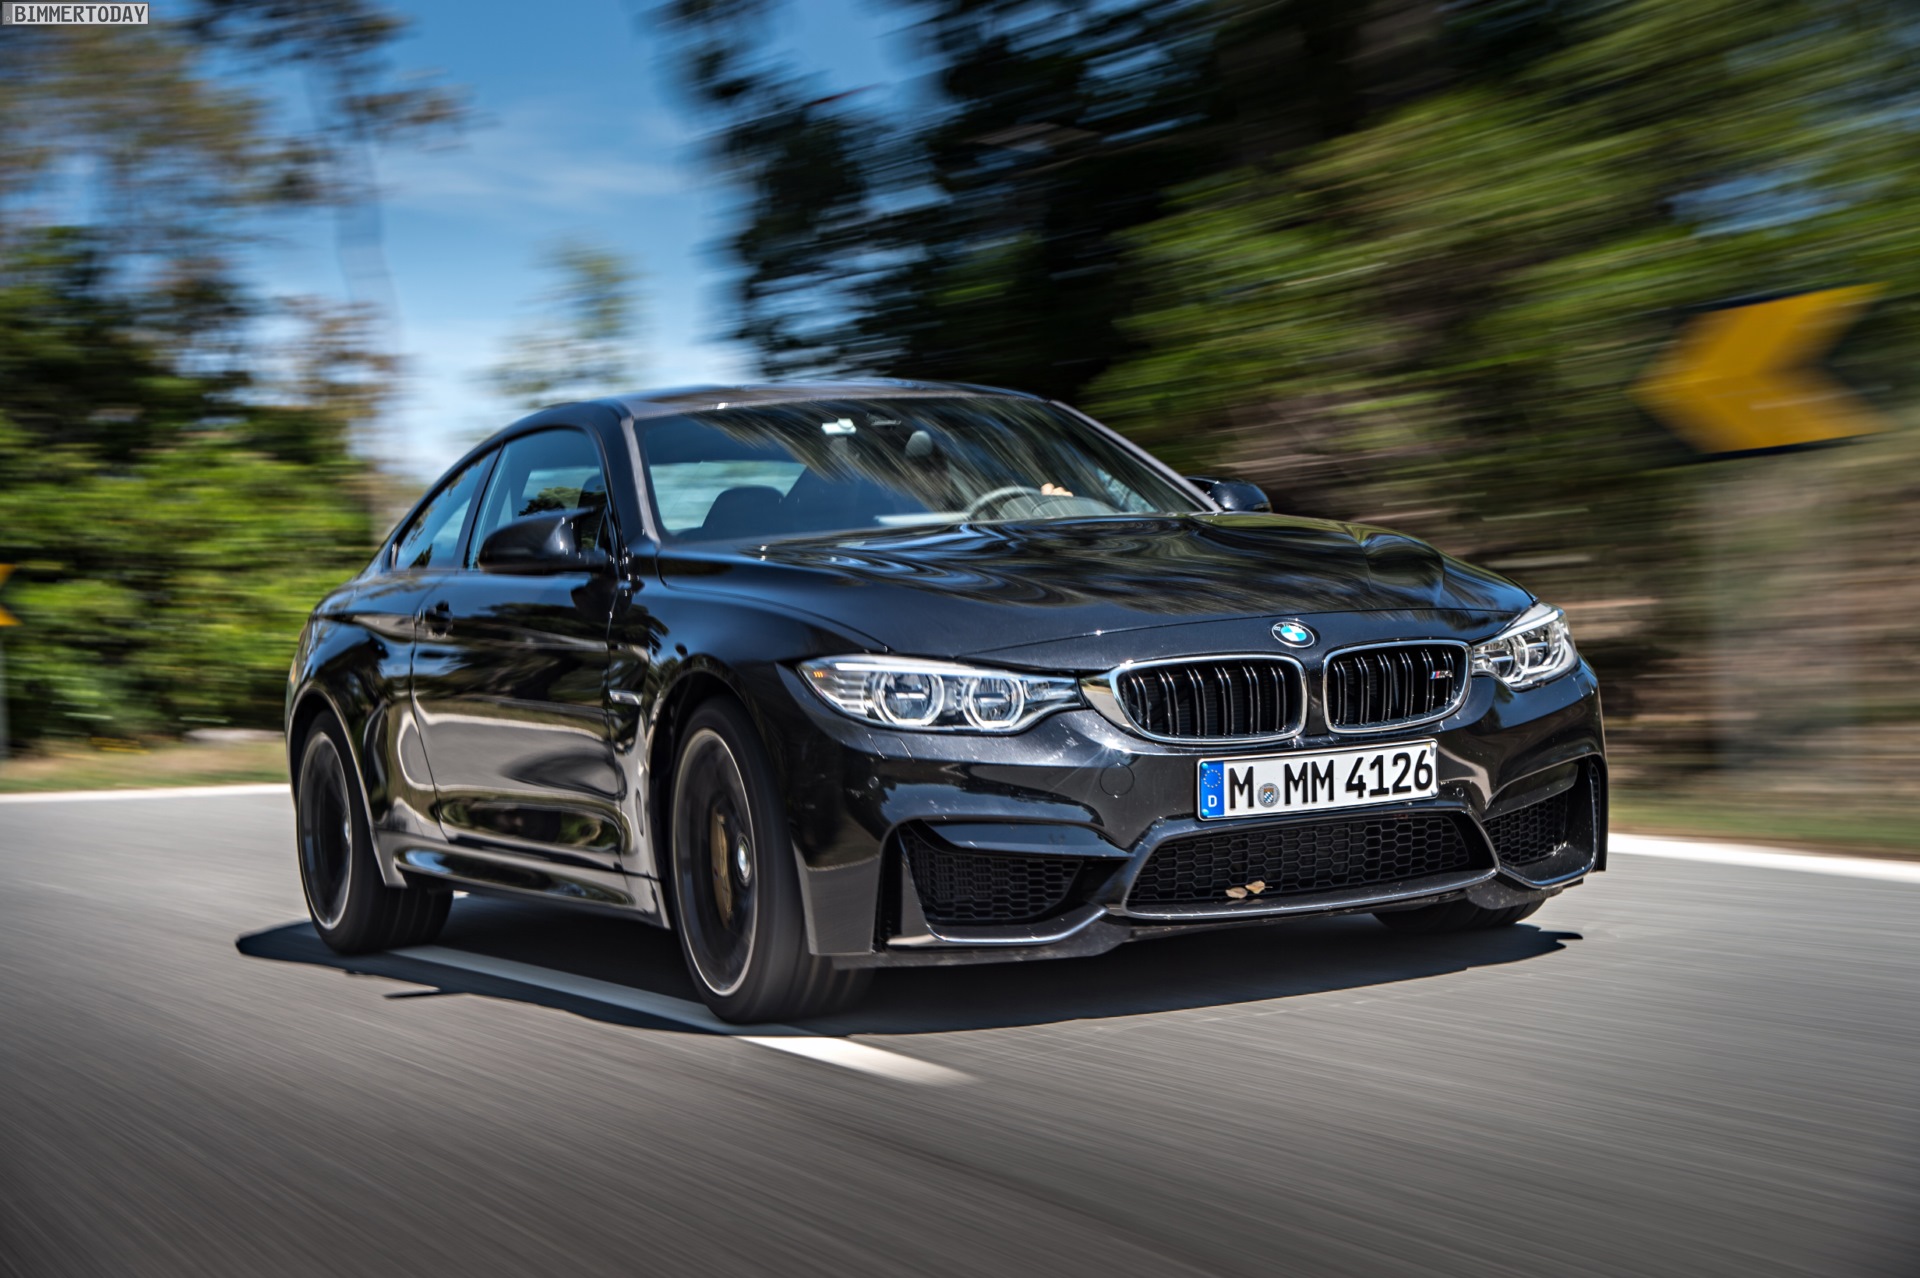 BMW Cars - Wallpapers: BMW M4 Coupe in Sapphire Black